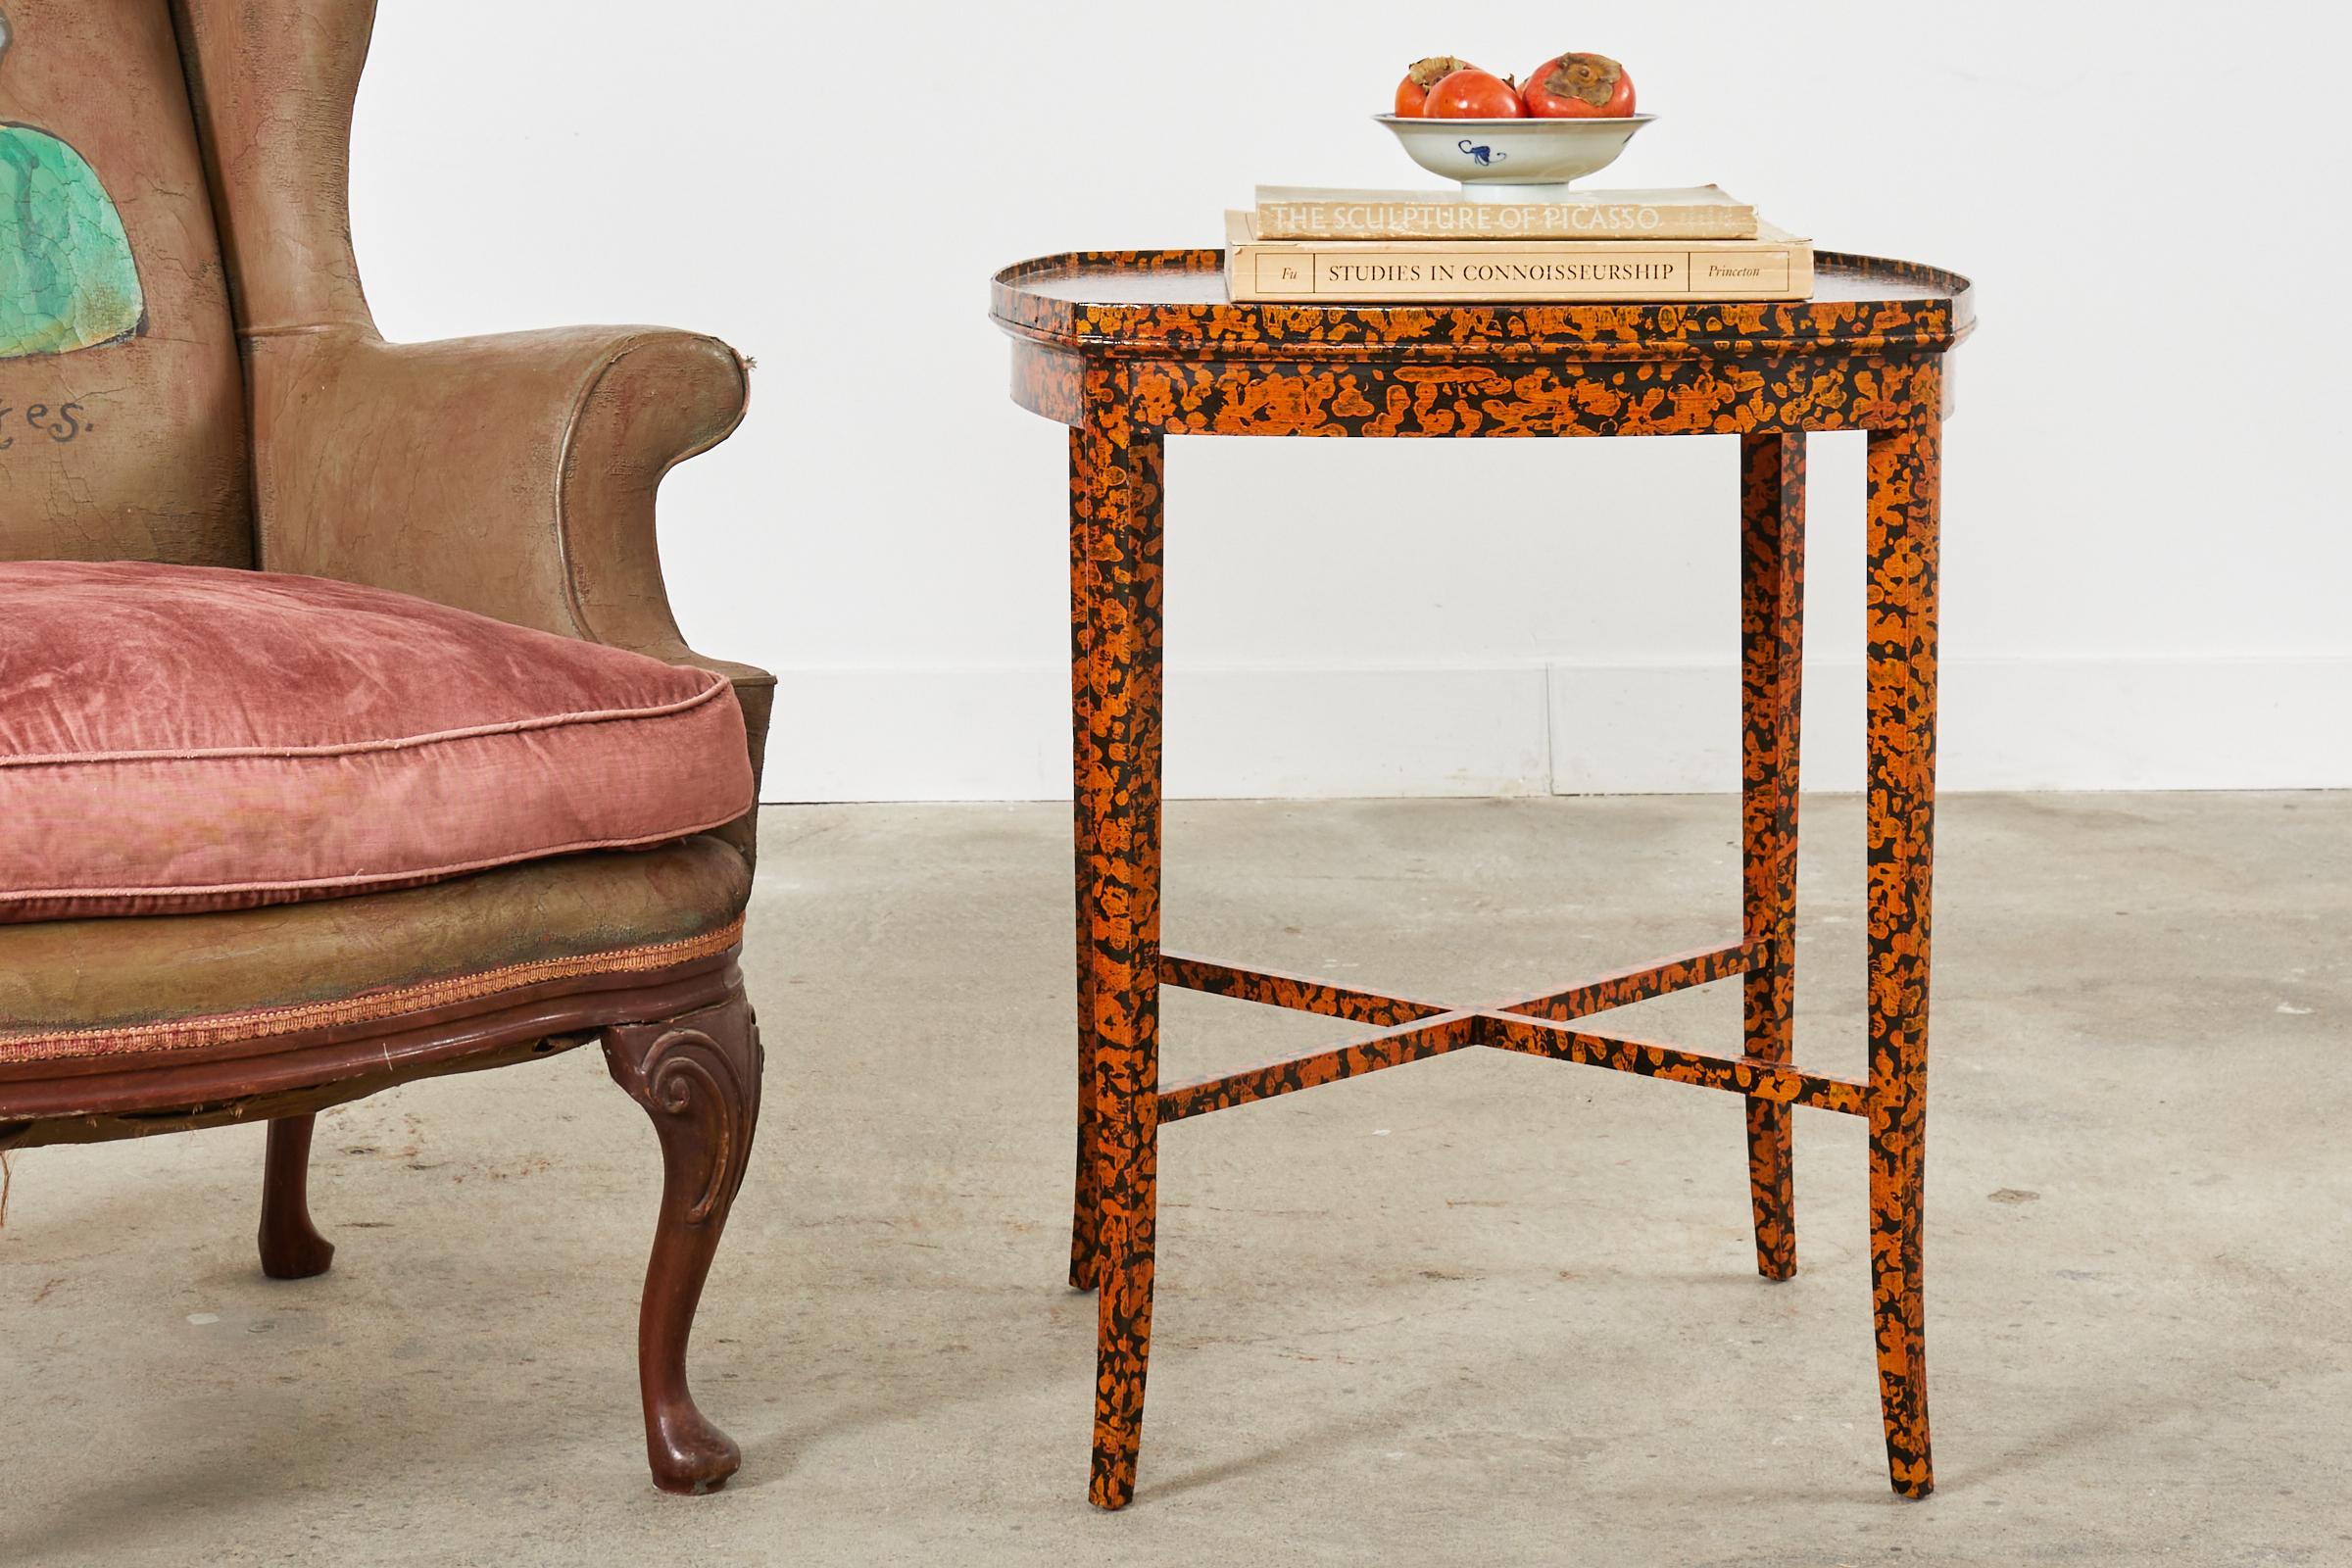 Whimsical late 19th century english center table or side table made in the regency taste. The table features a modern lacquer speckled finish by artist Ira Yeager (American 1933-2022). The table is constructed from mahogany with a square form and